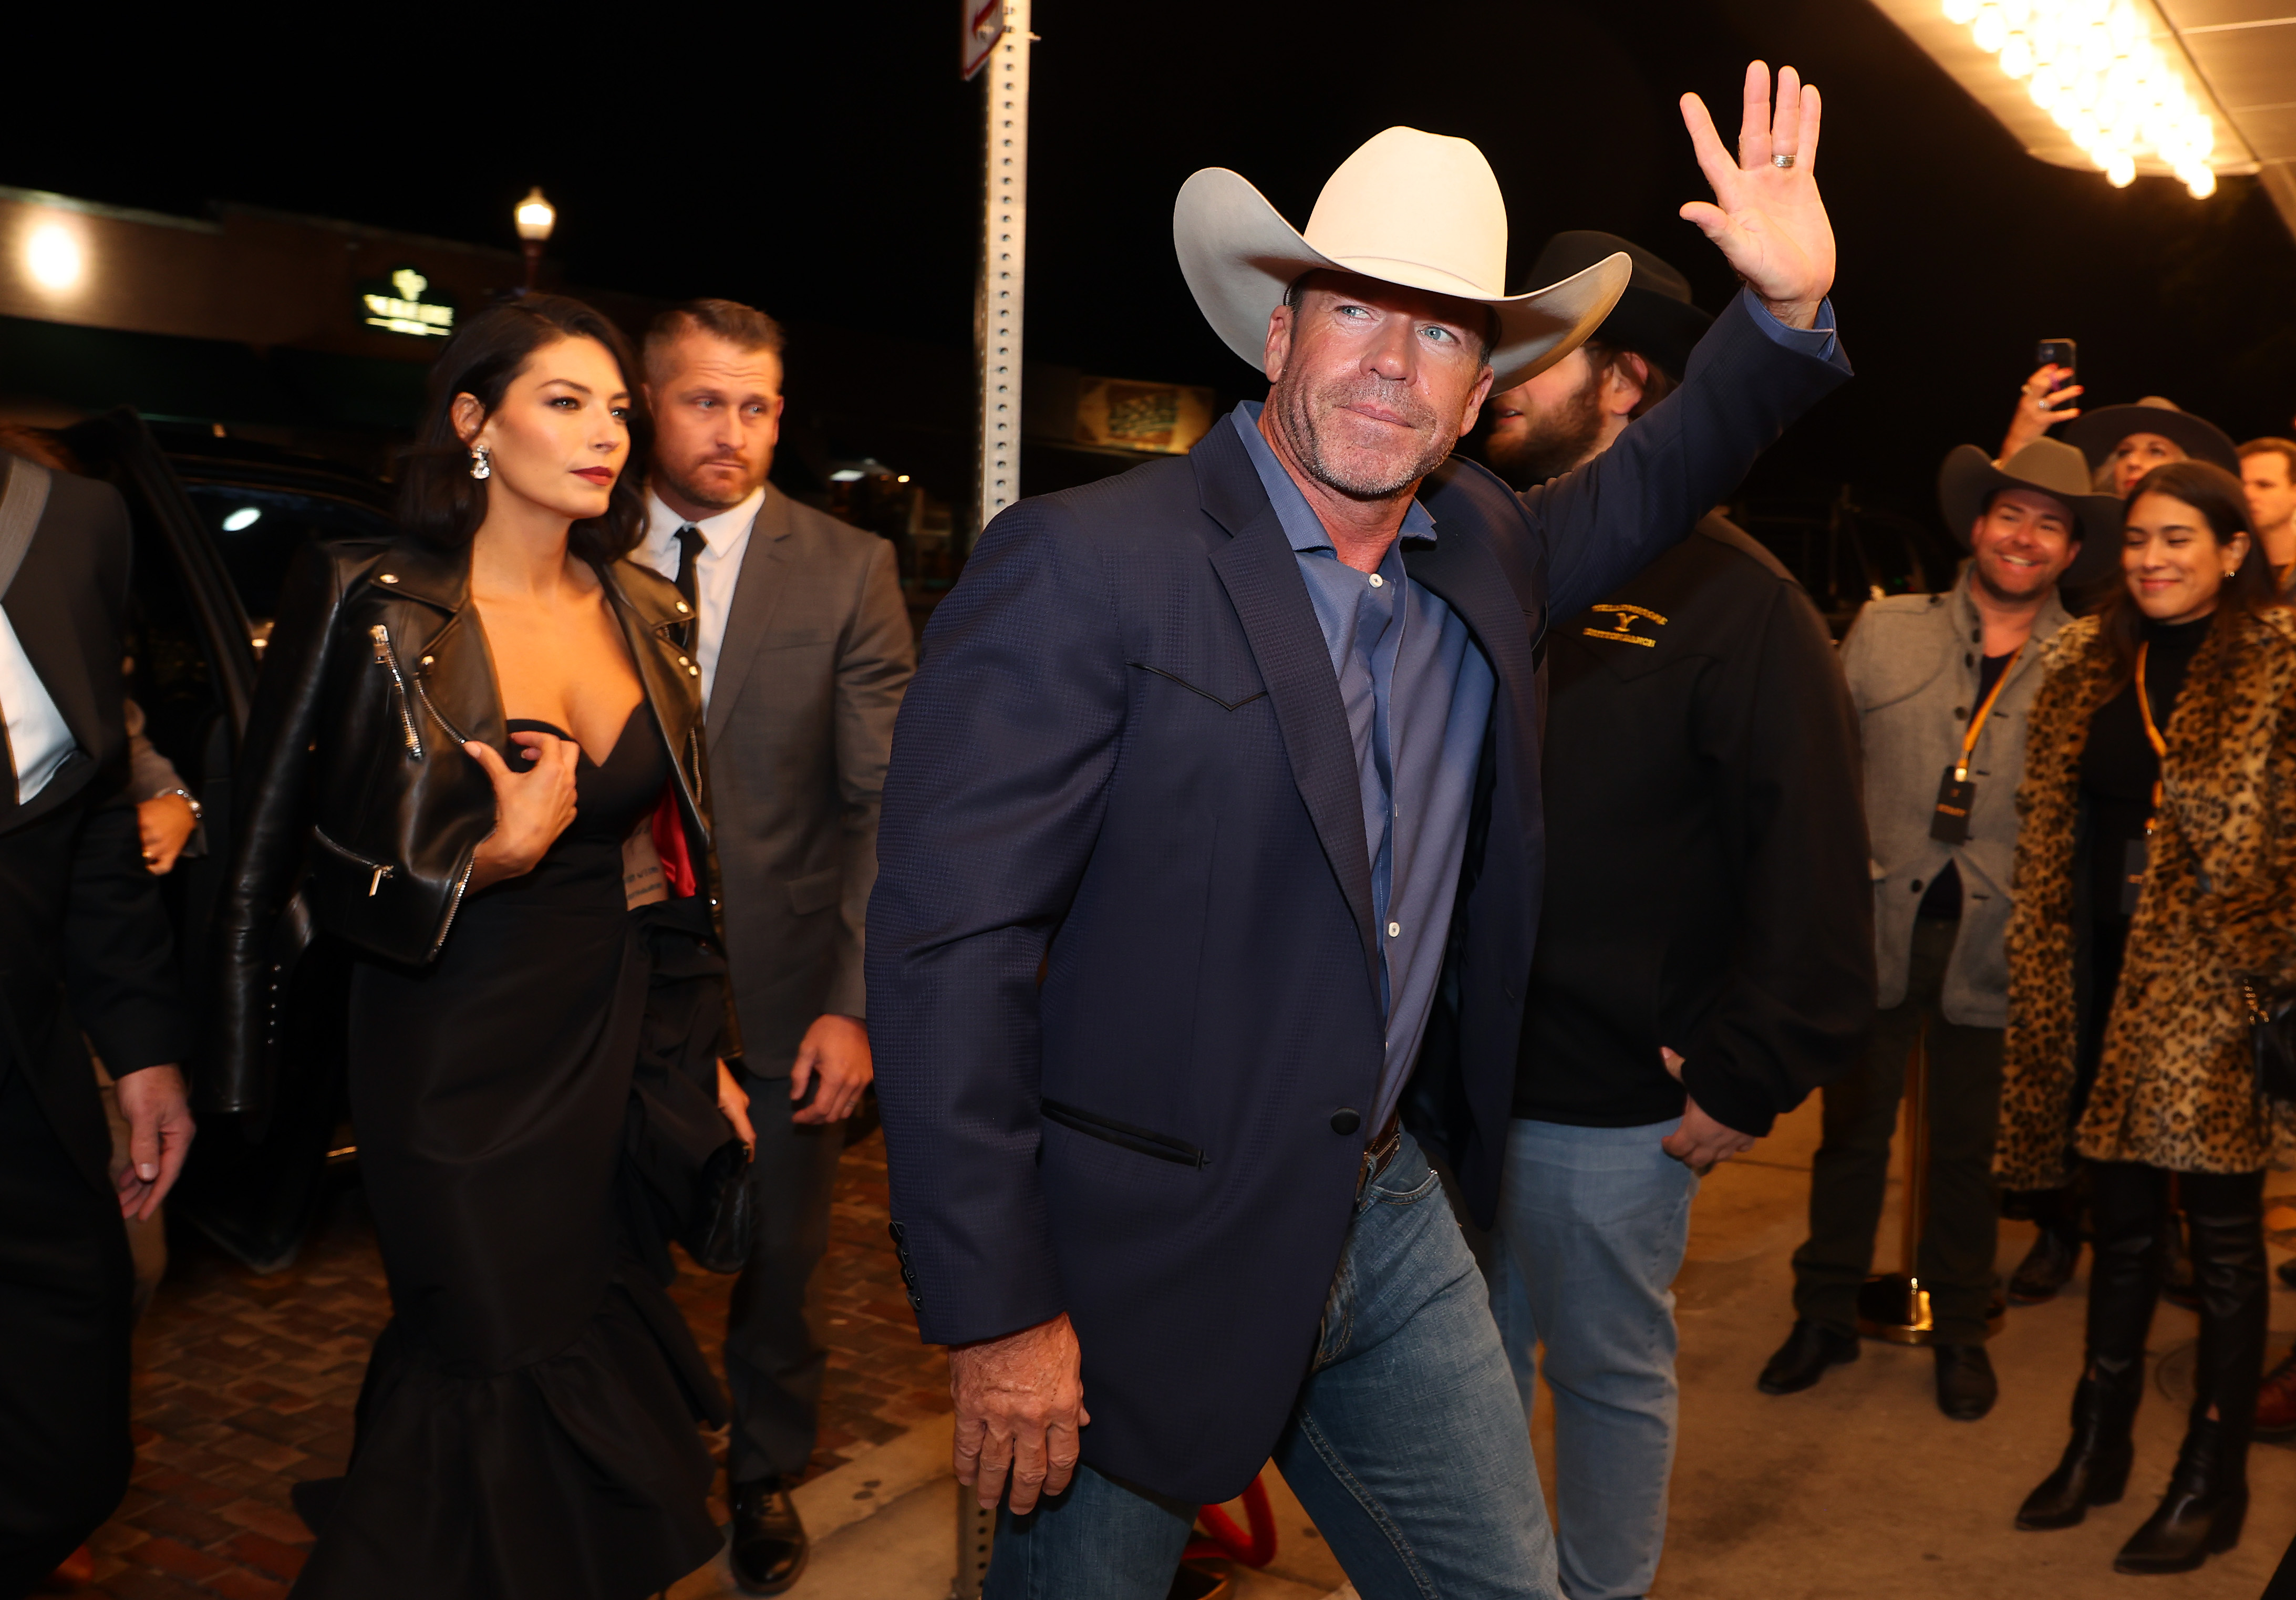 Taylor Sheridan wears a white cowboy hat, jeans, blue blazer, and light blue button up shirt. His wife Nicole, wears a black strapless full-length gown with a leather jacket.